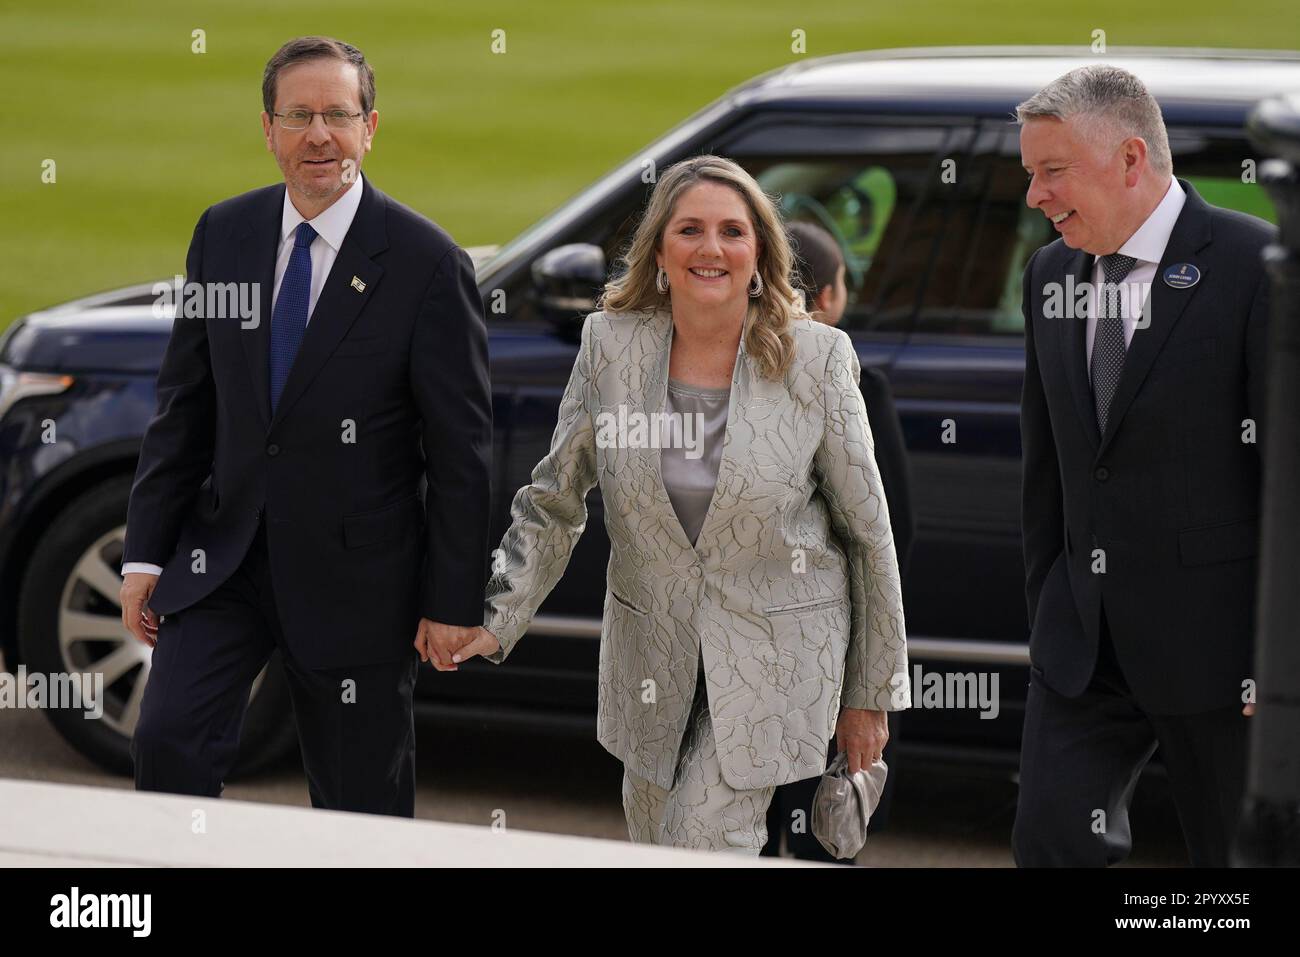 The President of Israel, Isaac Herzog (left), arrives, with his wife Michal, for a reception at Buckingham Palace in London, hosted by King Charles III for overseas guests attending his coronation. Picture date: Friday May 5, 2023. Stock Photo